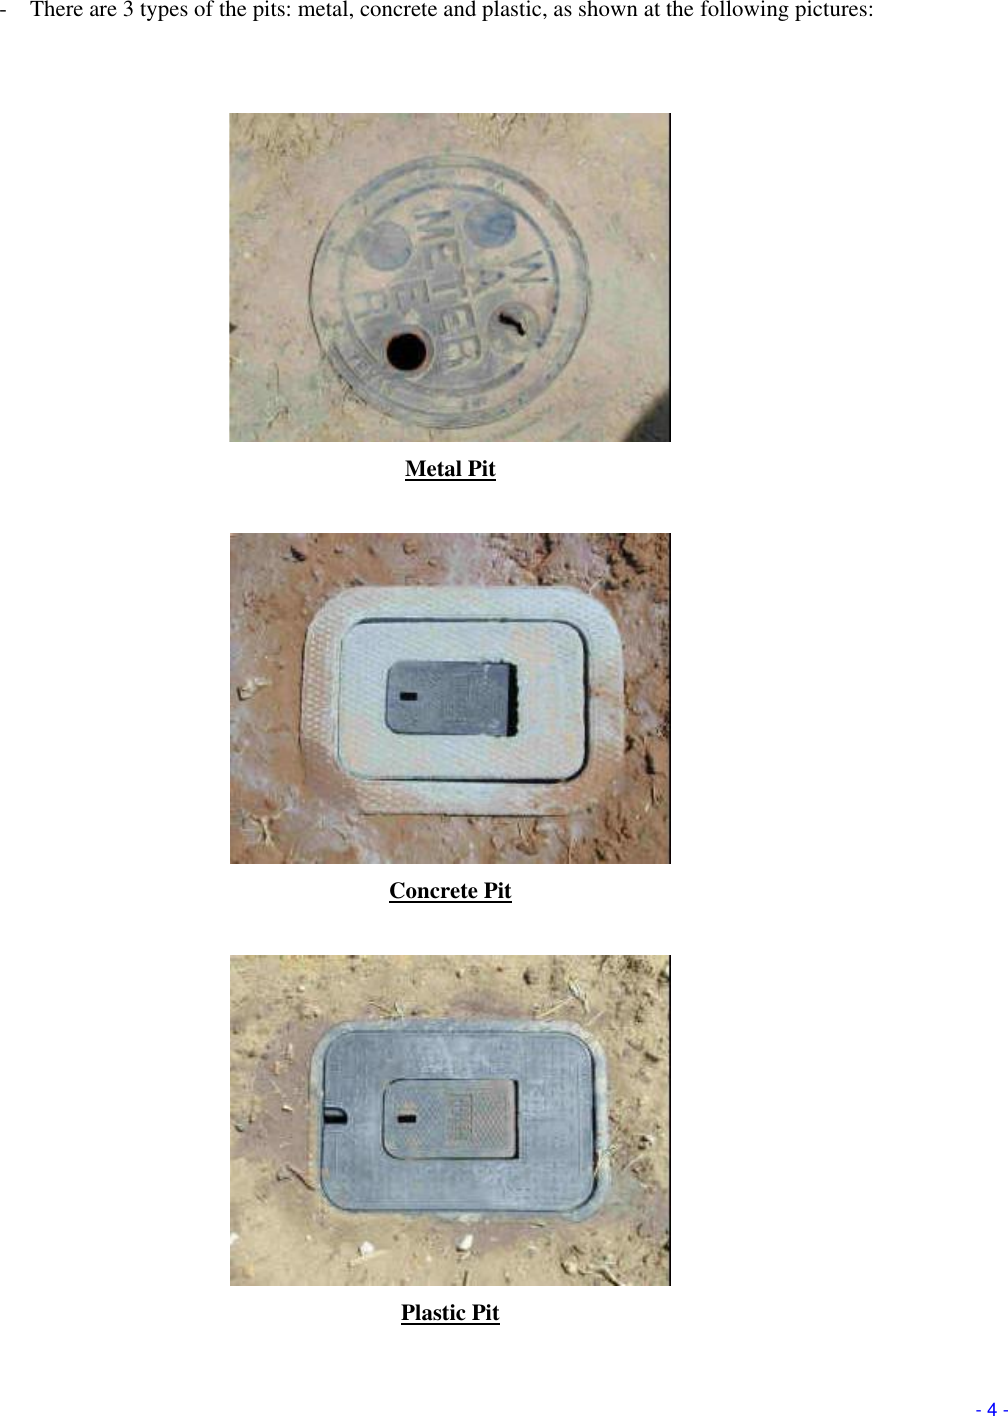       - 4 - - There are 3 types of the pits: metal, concrete and plastic, as shown at the following pictures:    Metal Pit   Concrete Pit   Plastic Pit 